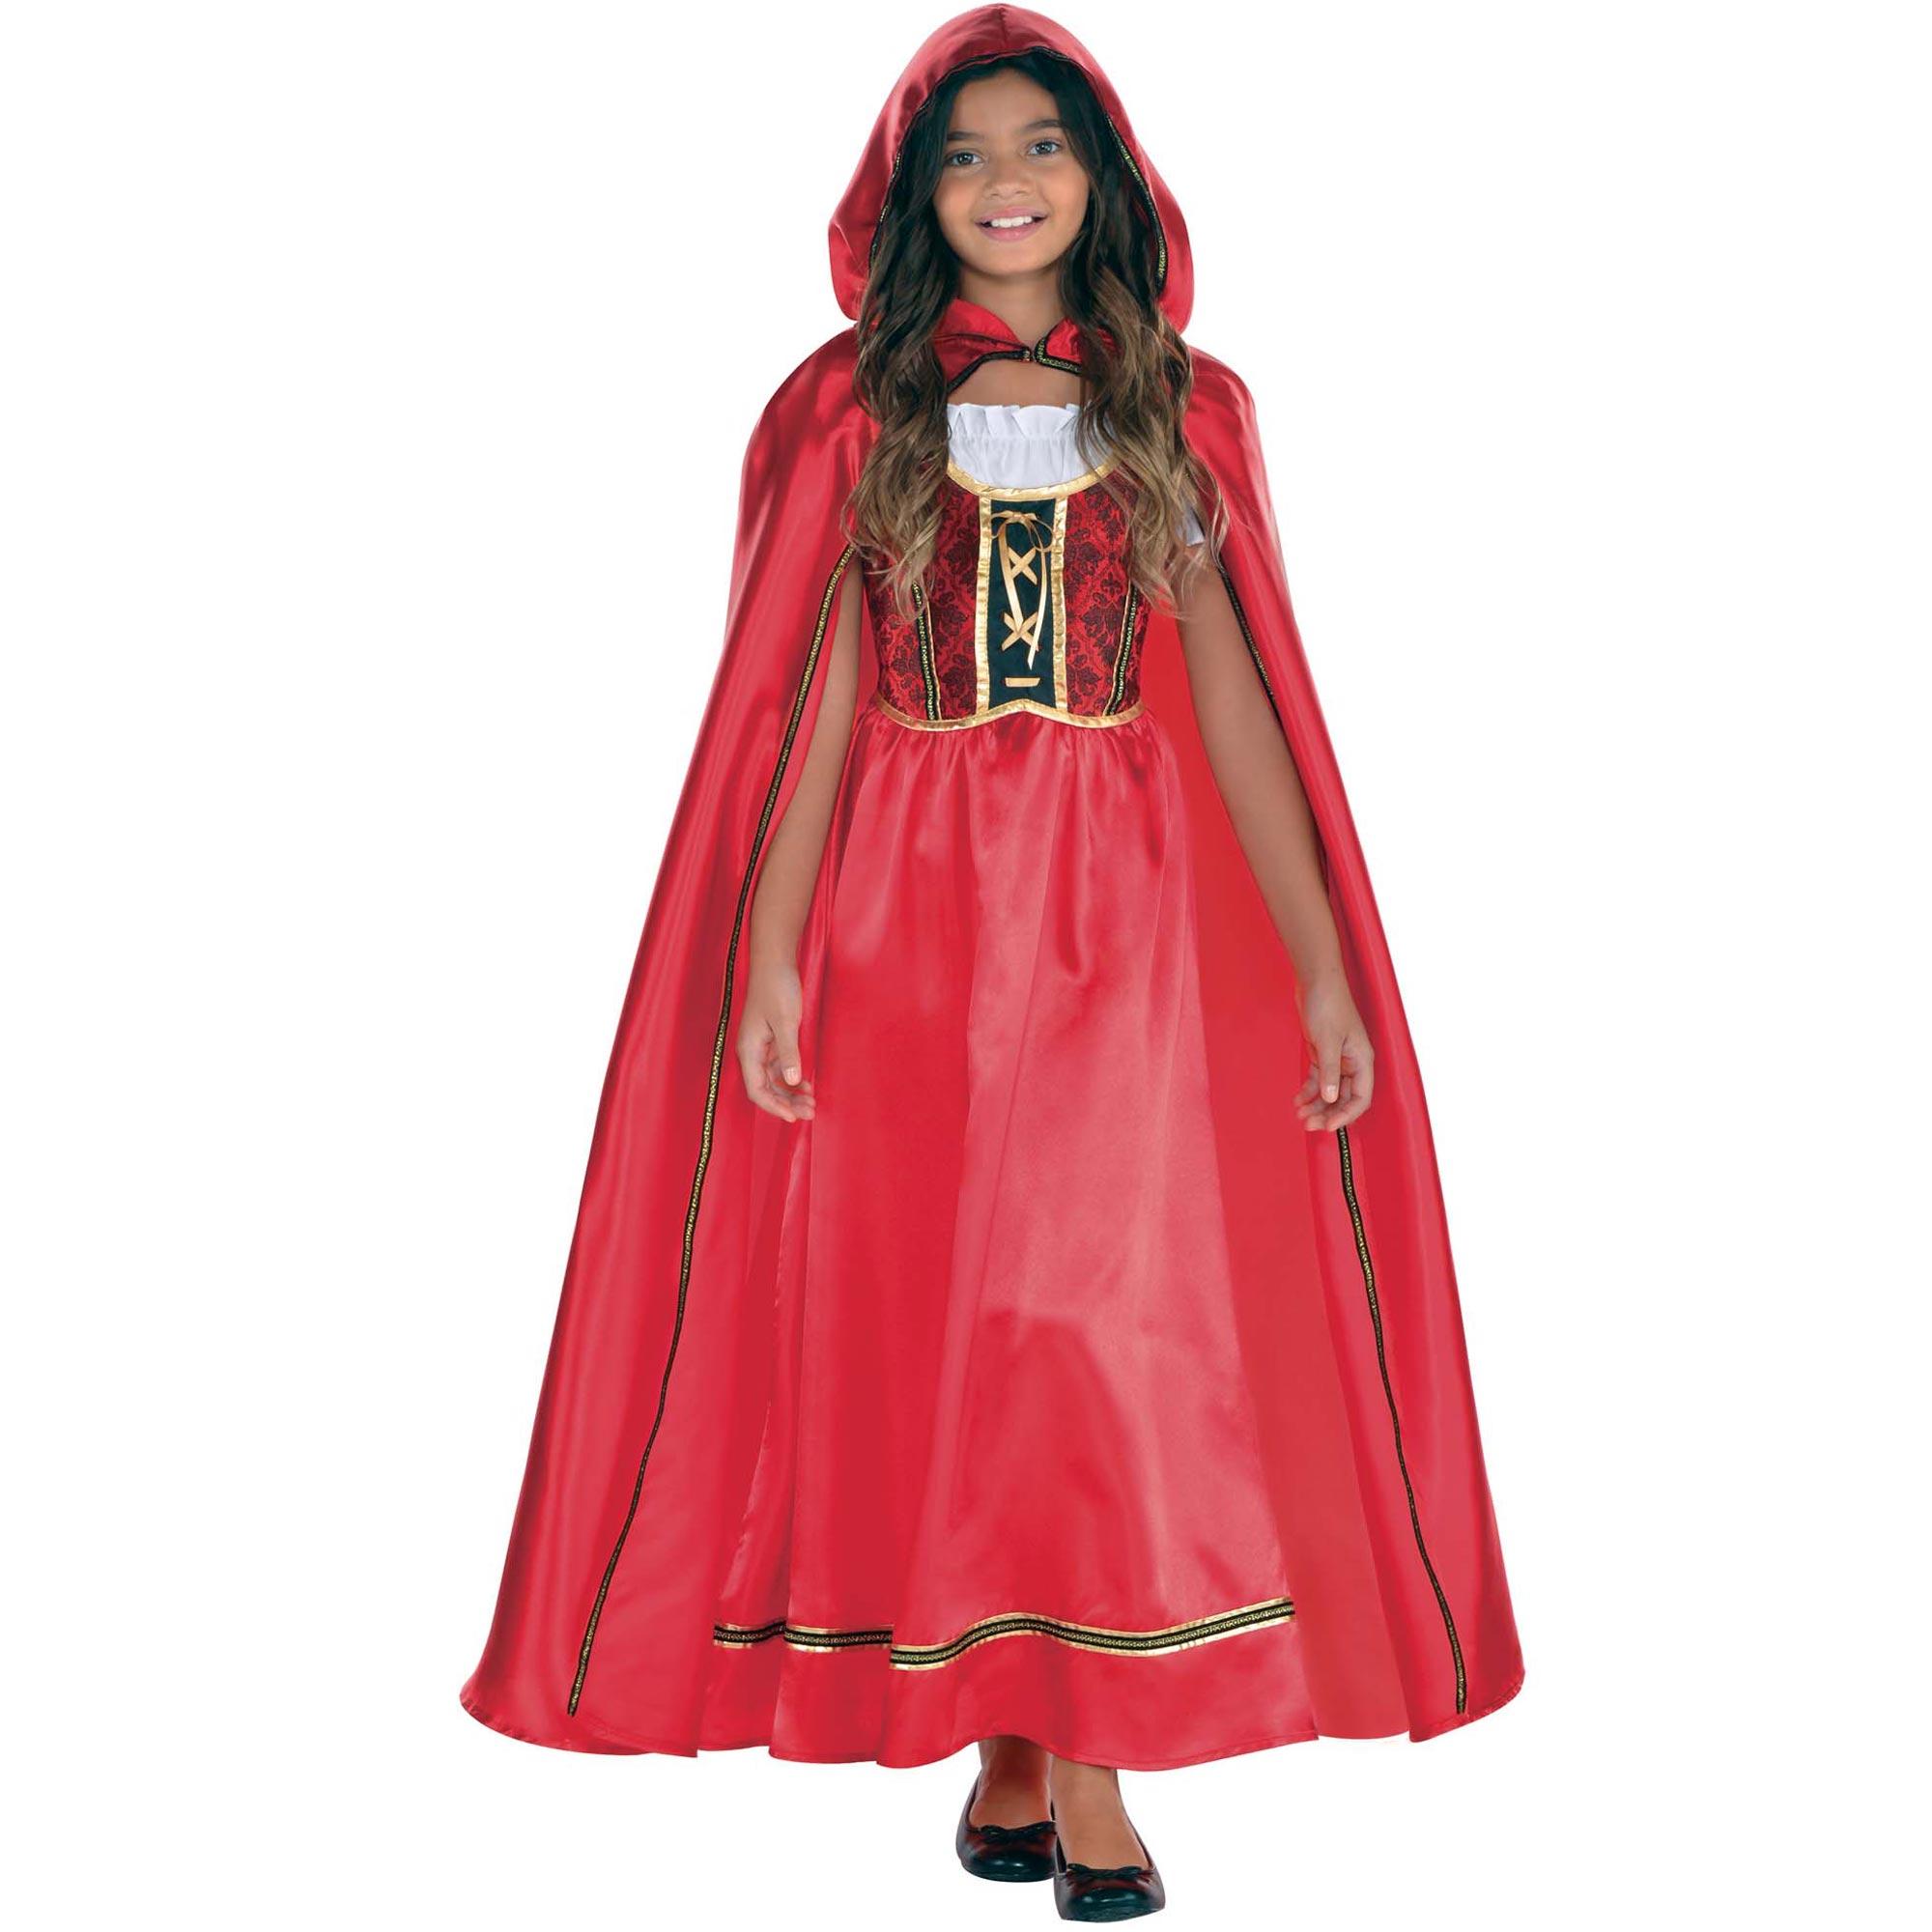 Toddler Fairytale Riding Hood Costume Costumes & Apparel - Party Centre